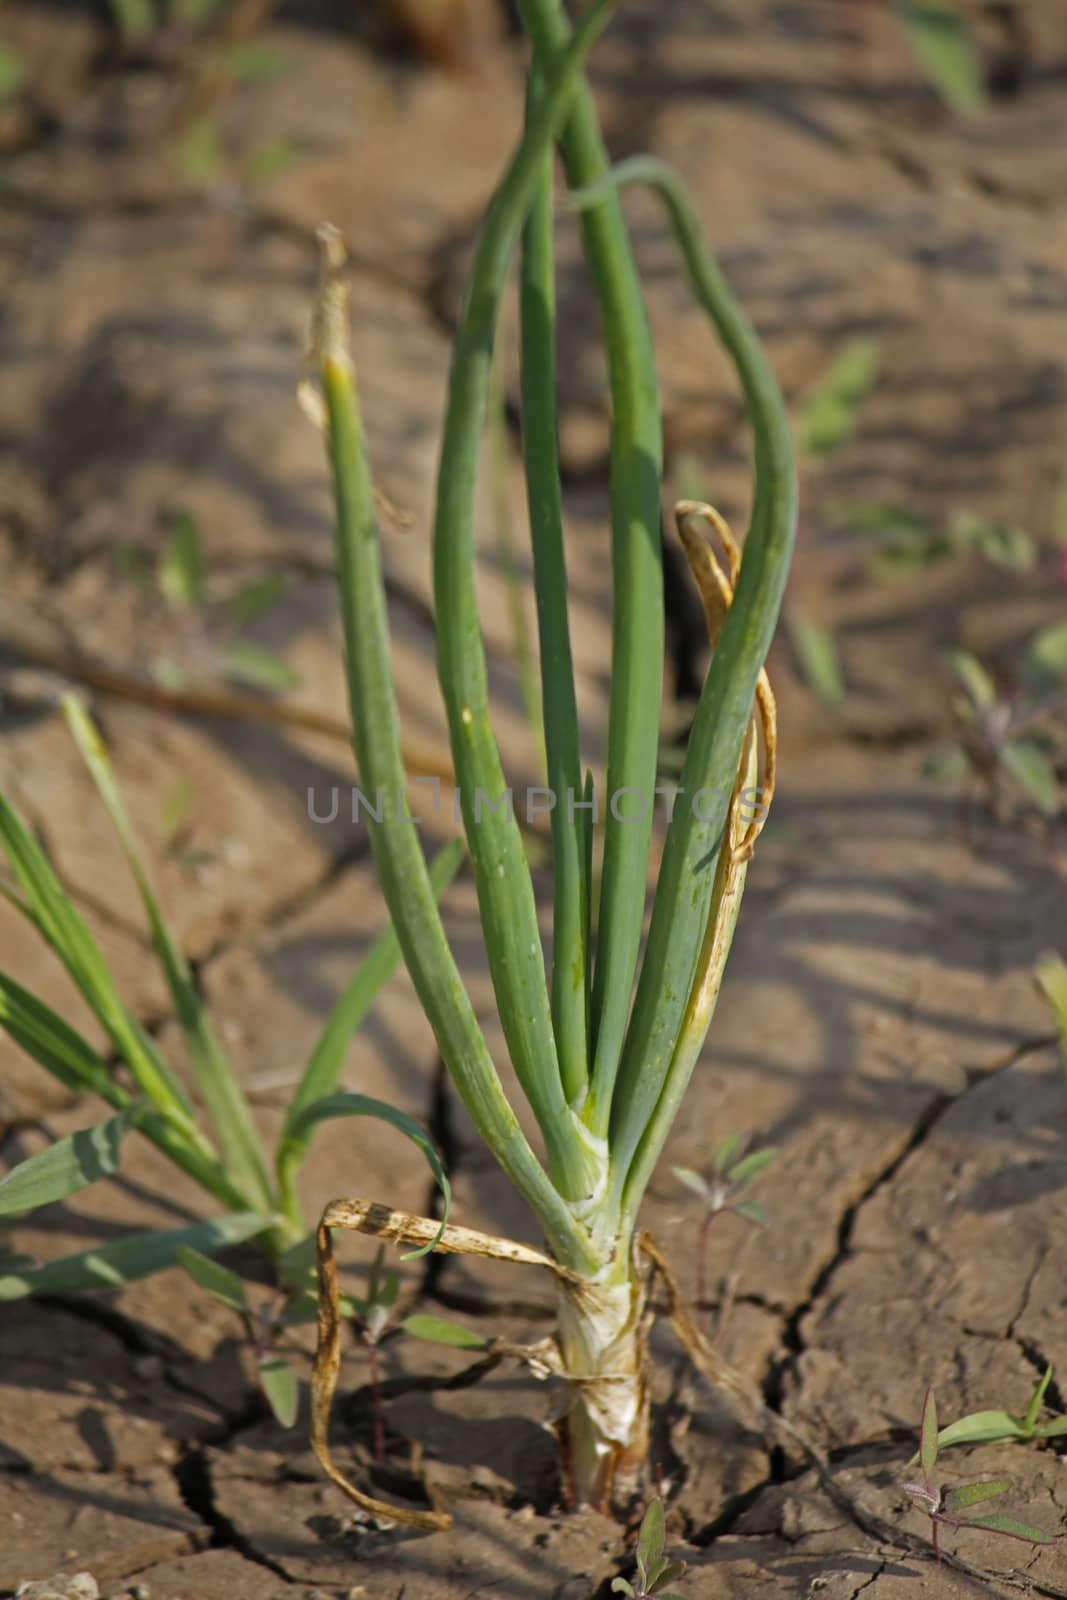 Roots, leaves and developing bulb of onion by yands